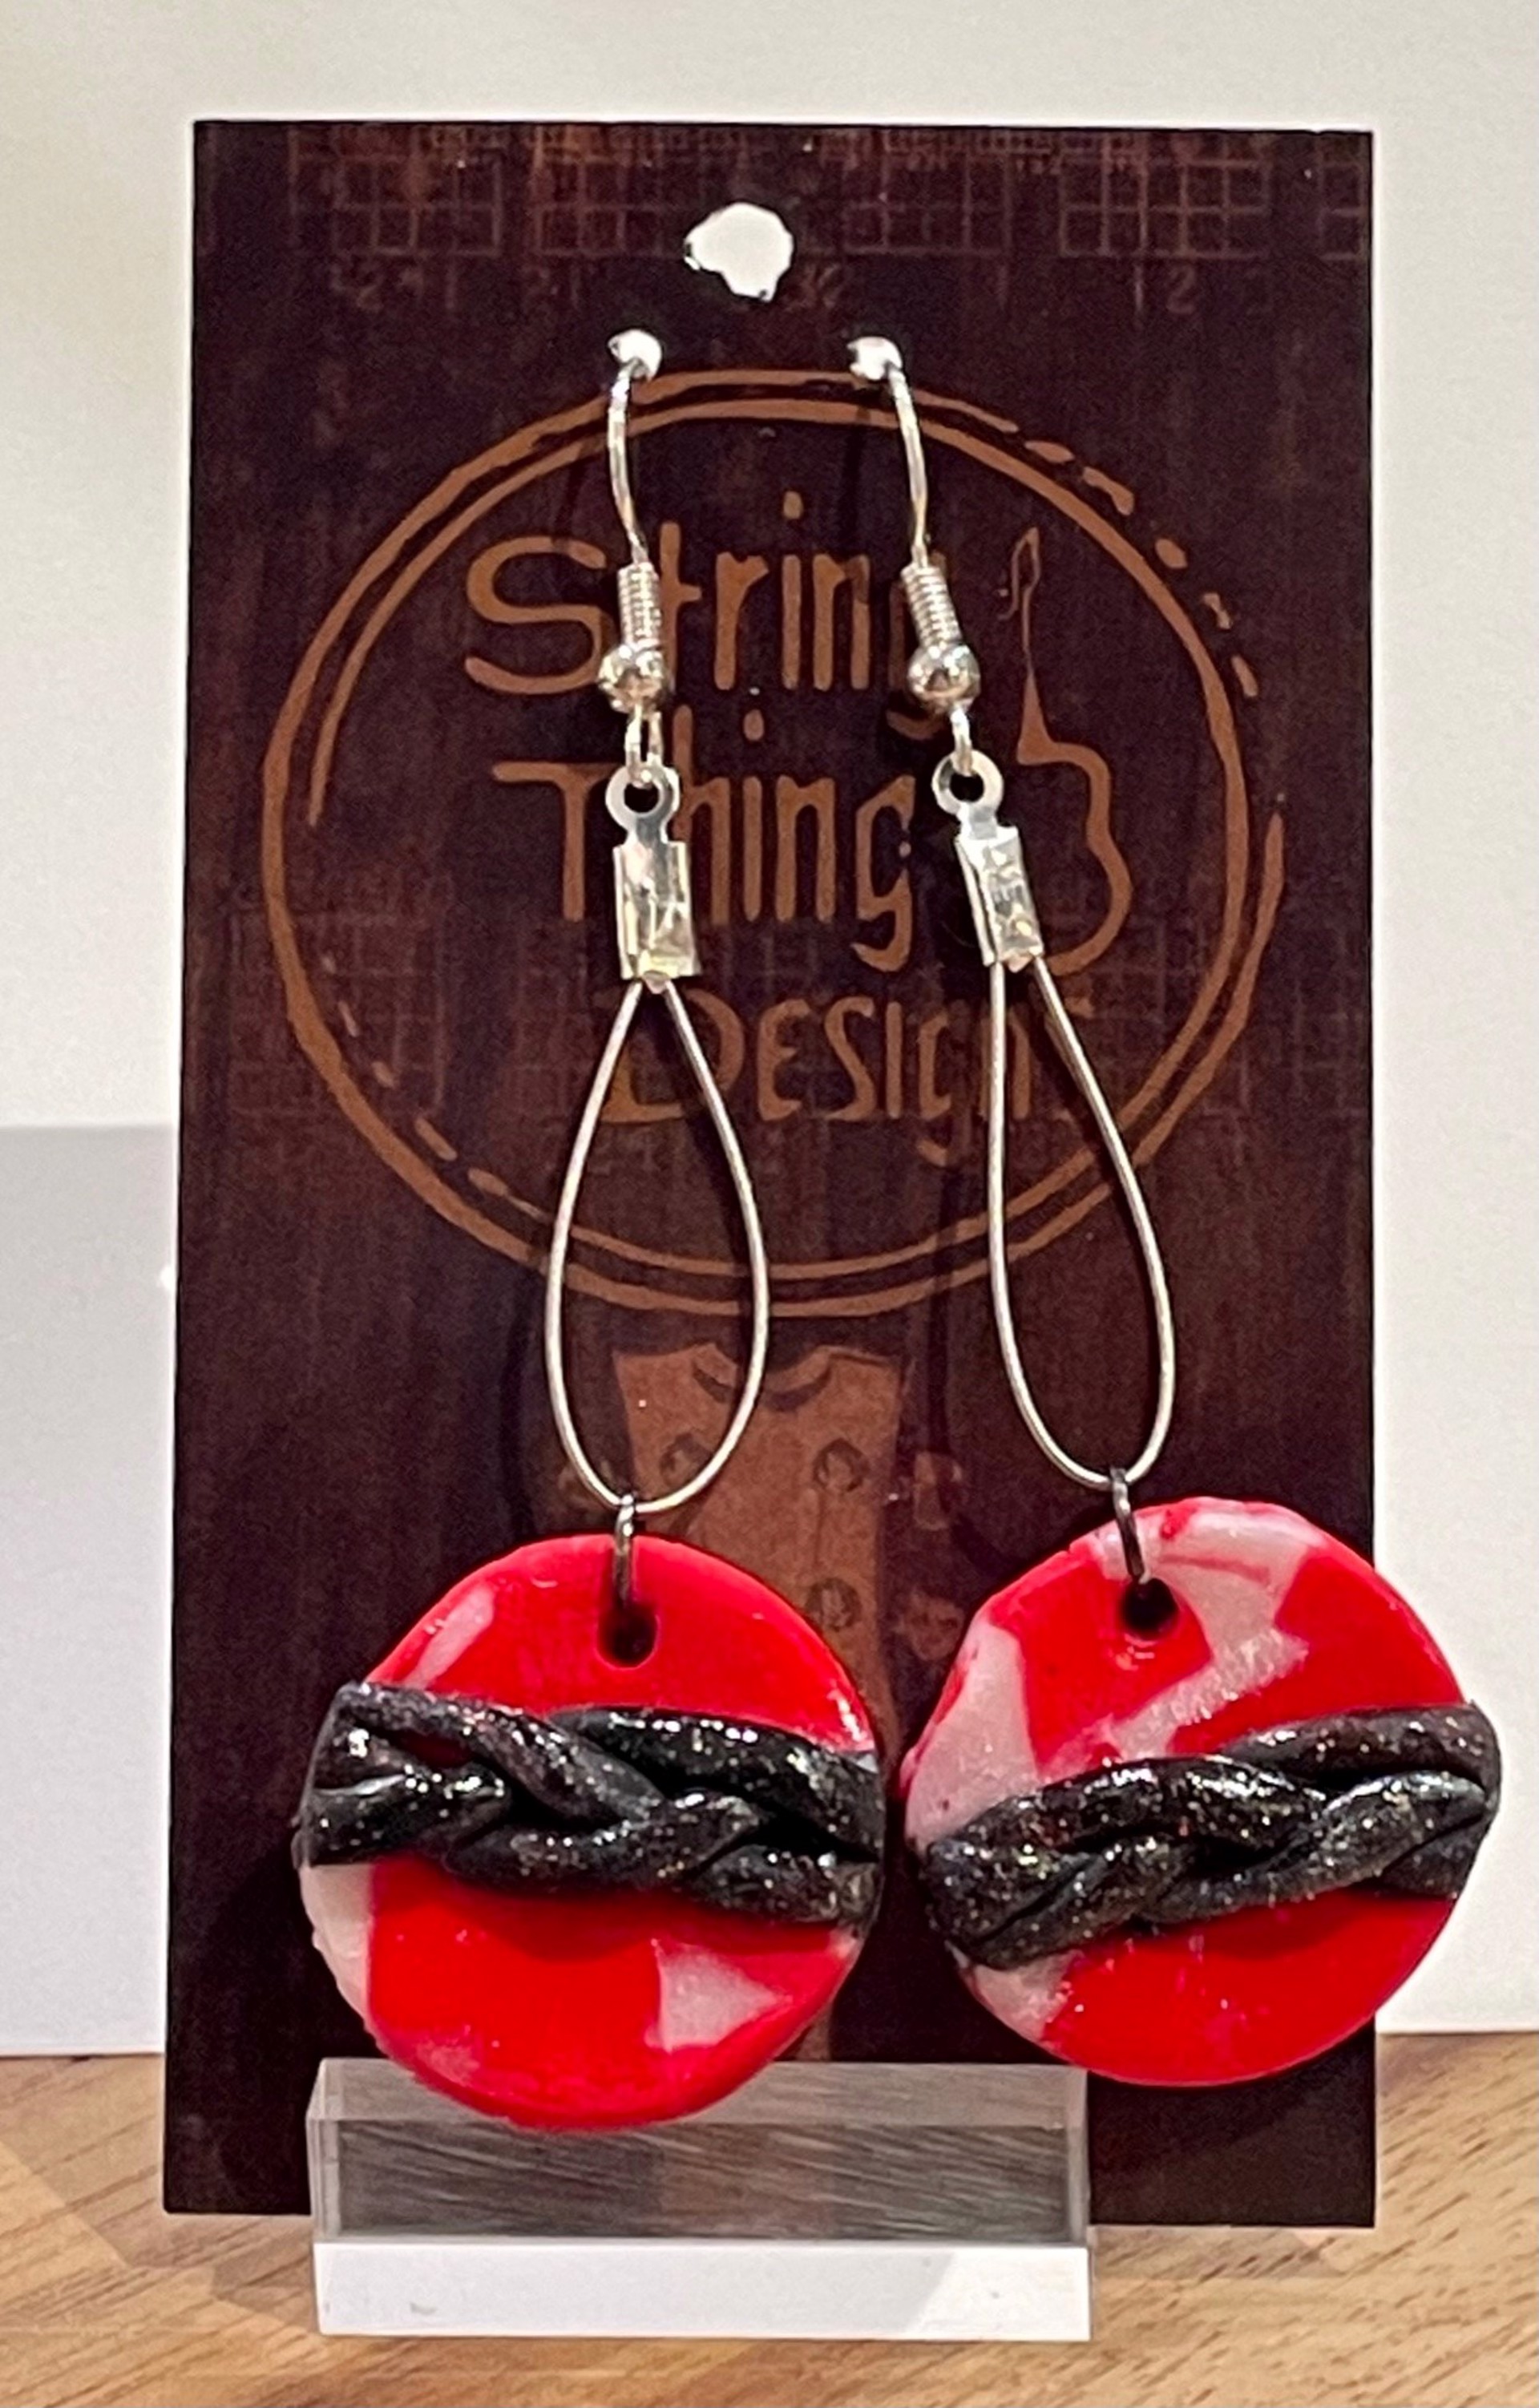 Red with Black Braid Guitar String Earrings by String Thing Designs